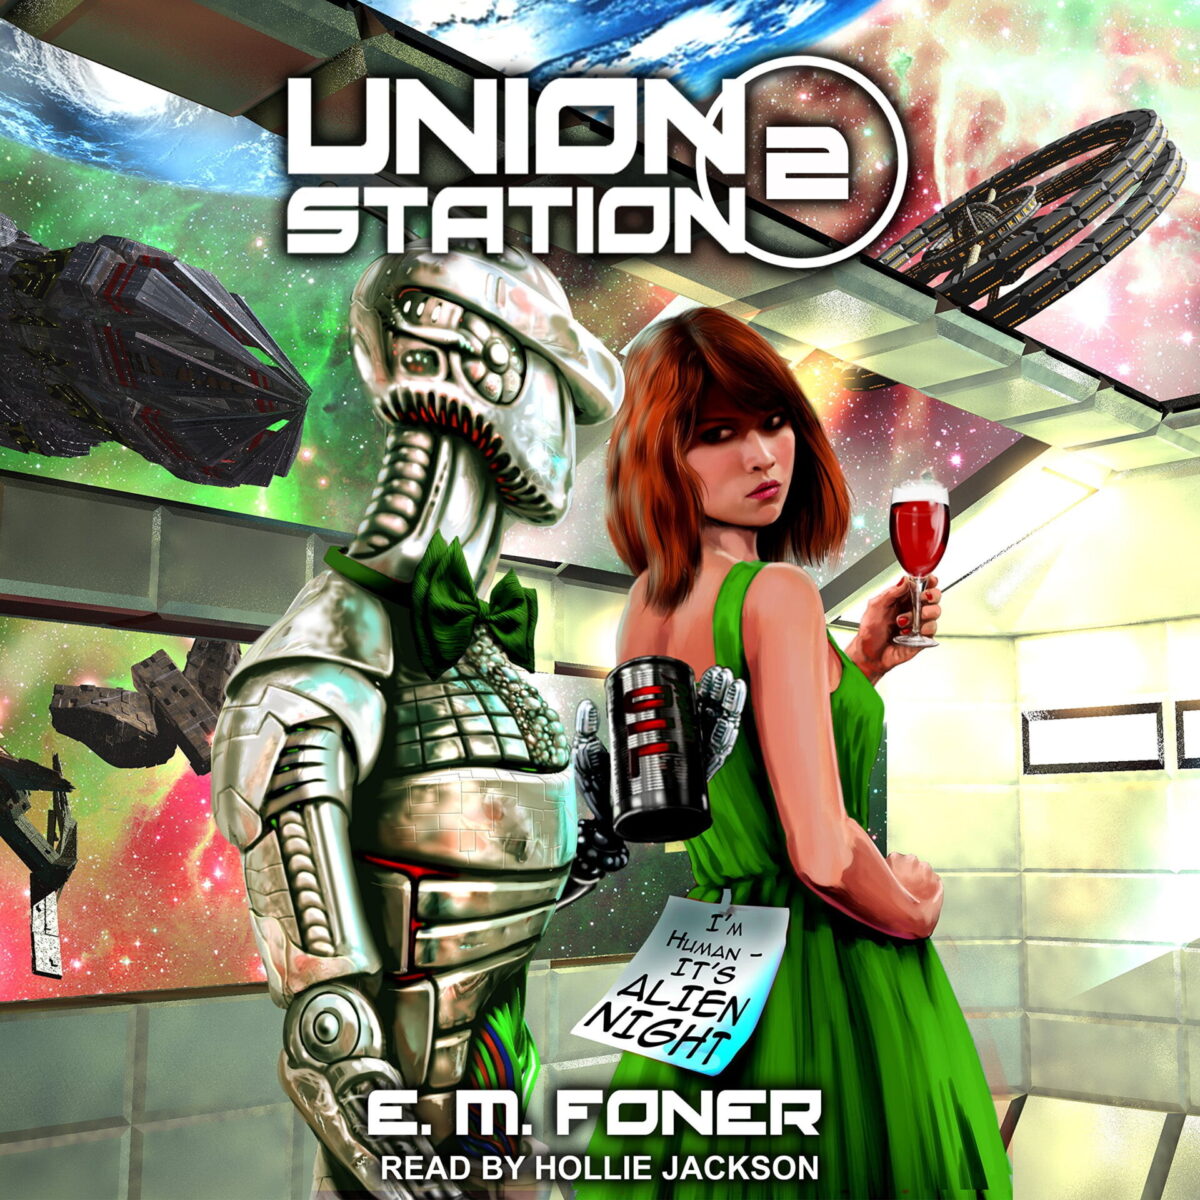 Alien Night on Union Station – The Audiobook Review